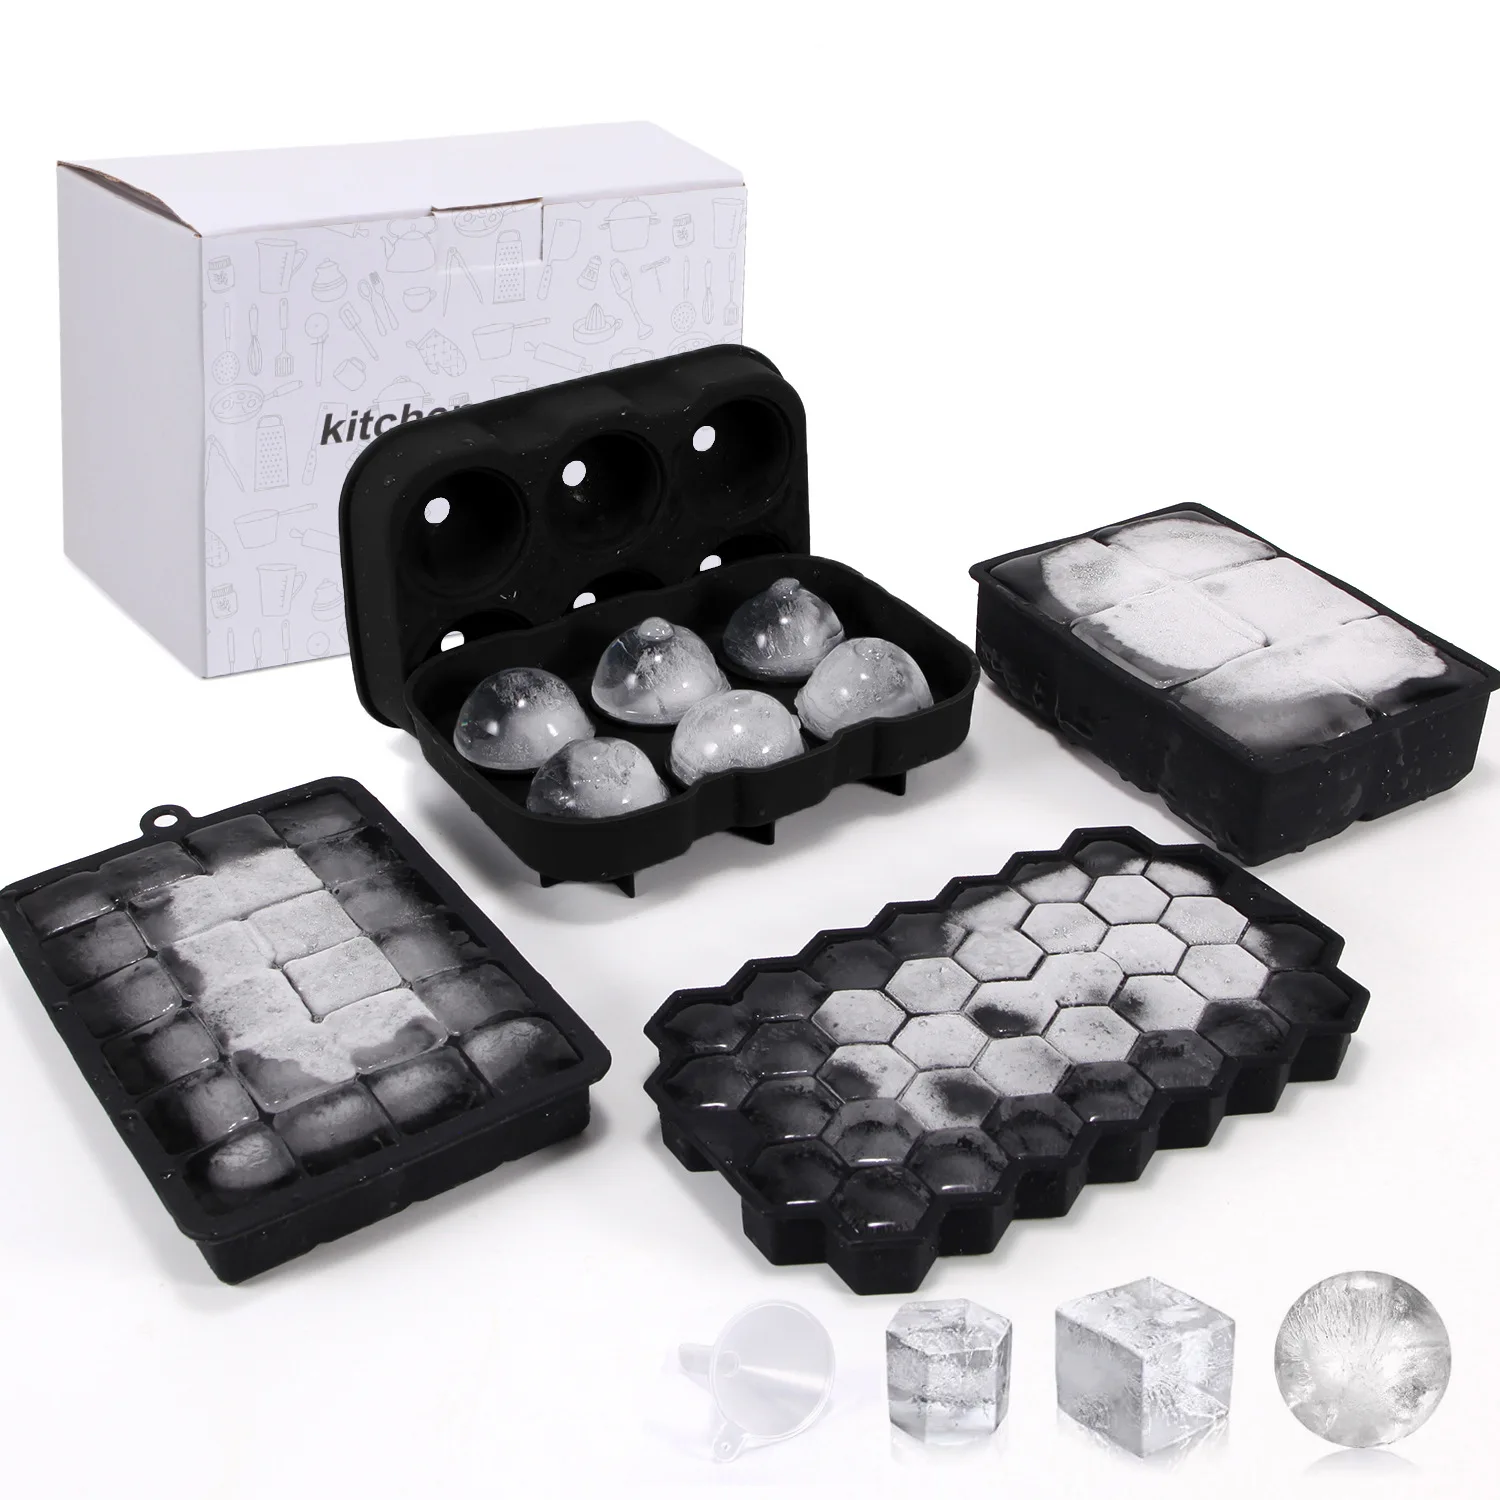 

Round Bpa Free Ice Making Spheres Mold Ice Cube Maker Tray Silicone Ice Ball Square Hexagon Mold Set For Whiskey, Black